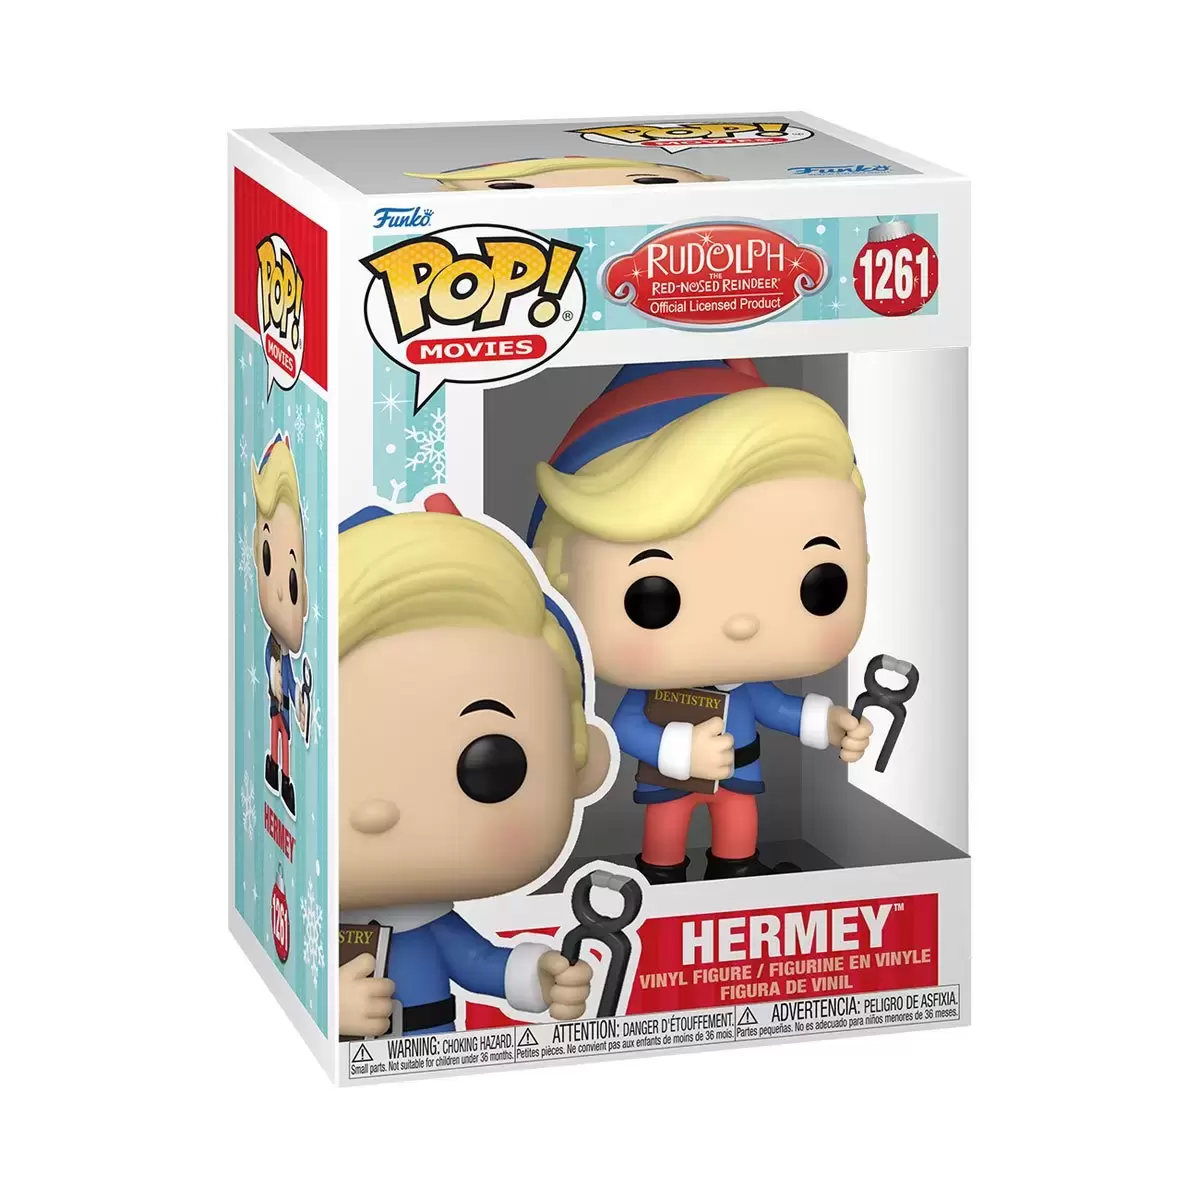 POP! Movies - Rudolph the Red-Nosed Reindeer - Hermey